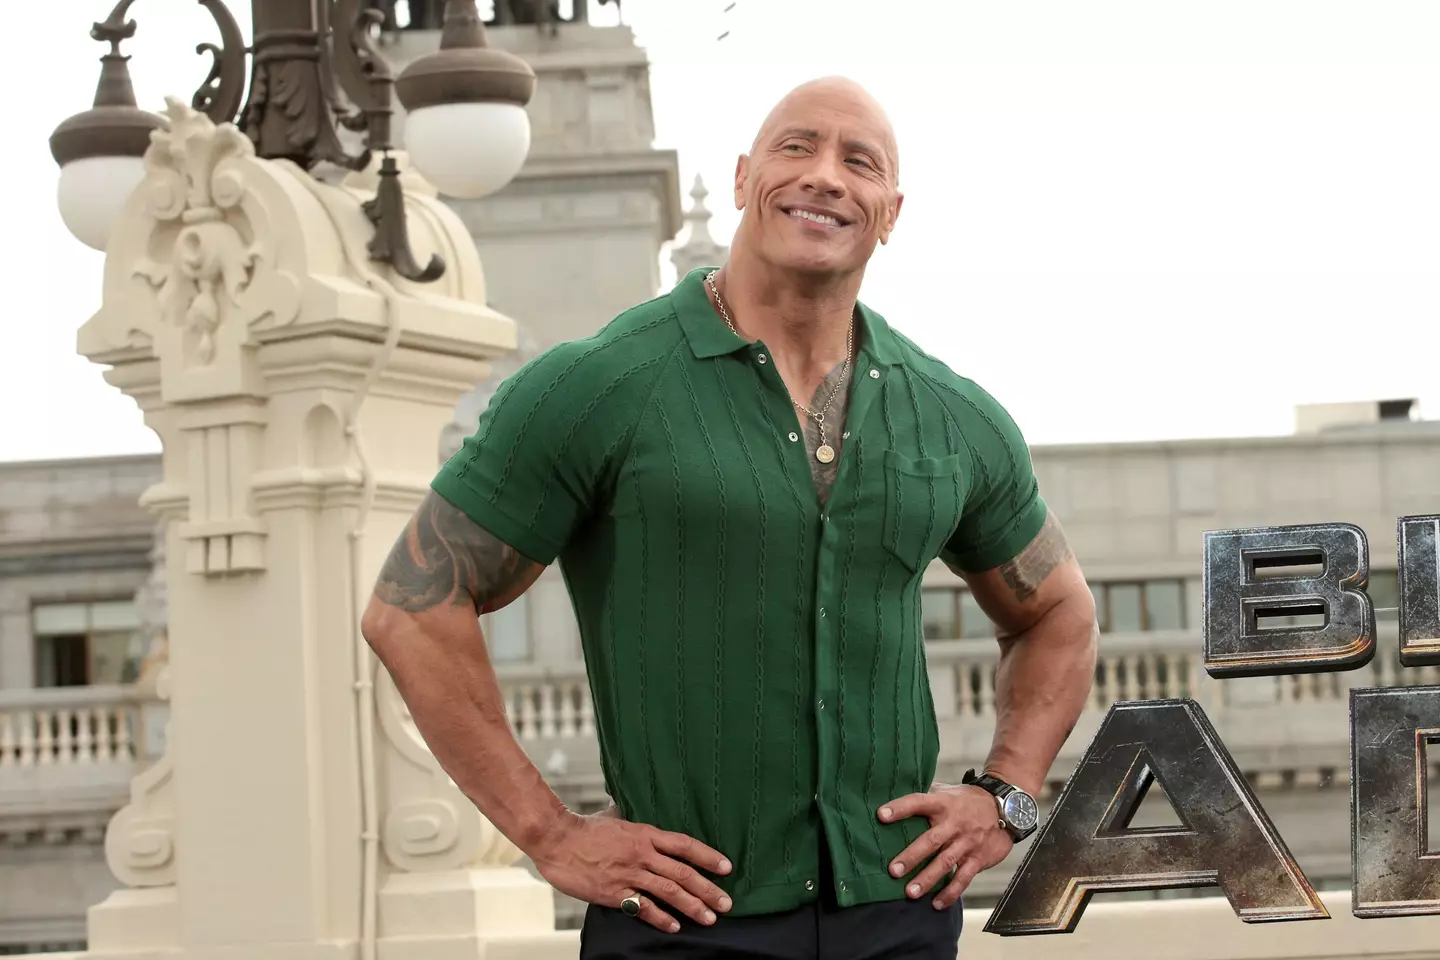 Dwayne Johnson admitted to using steroids when he was a teenager